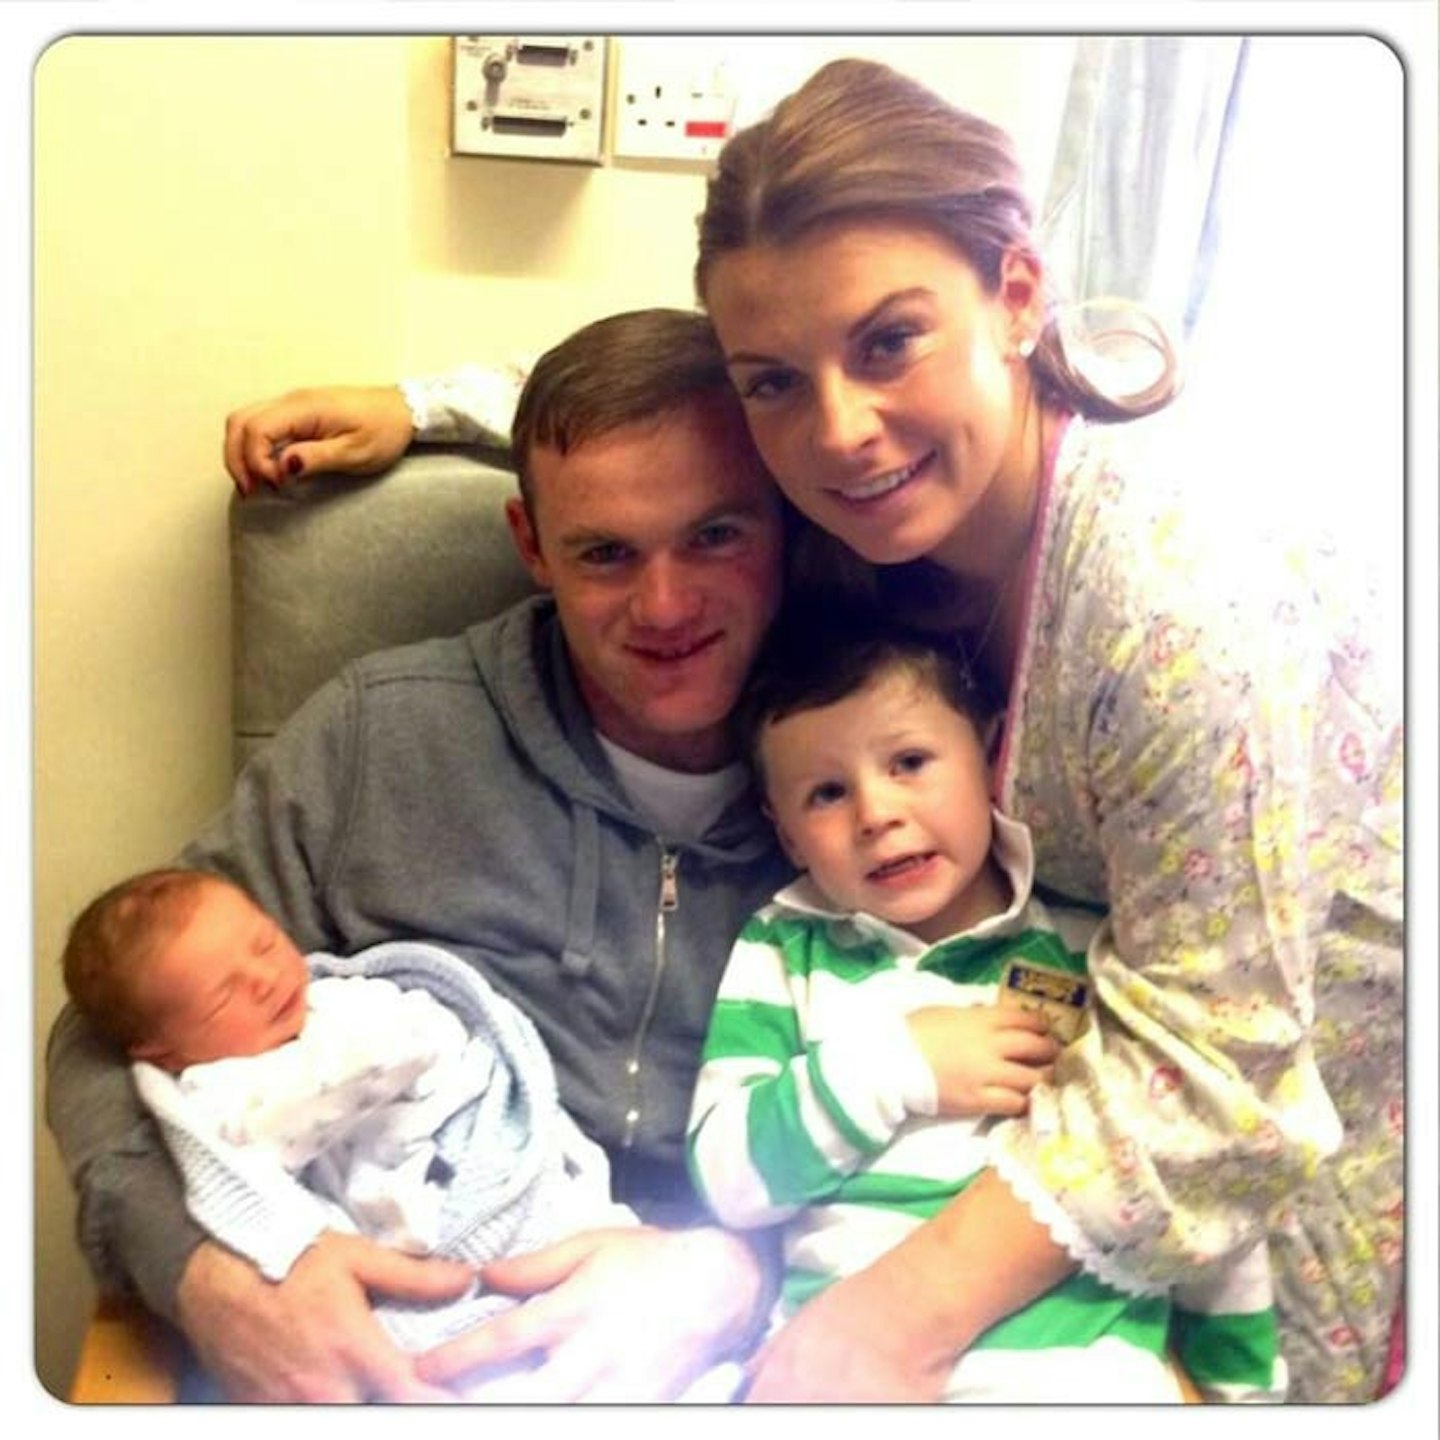 Coleen Rooney is a great mum to her two boys, Klay and Kai